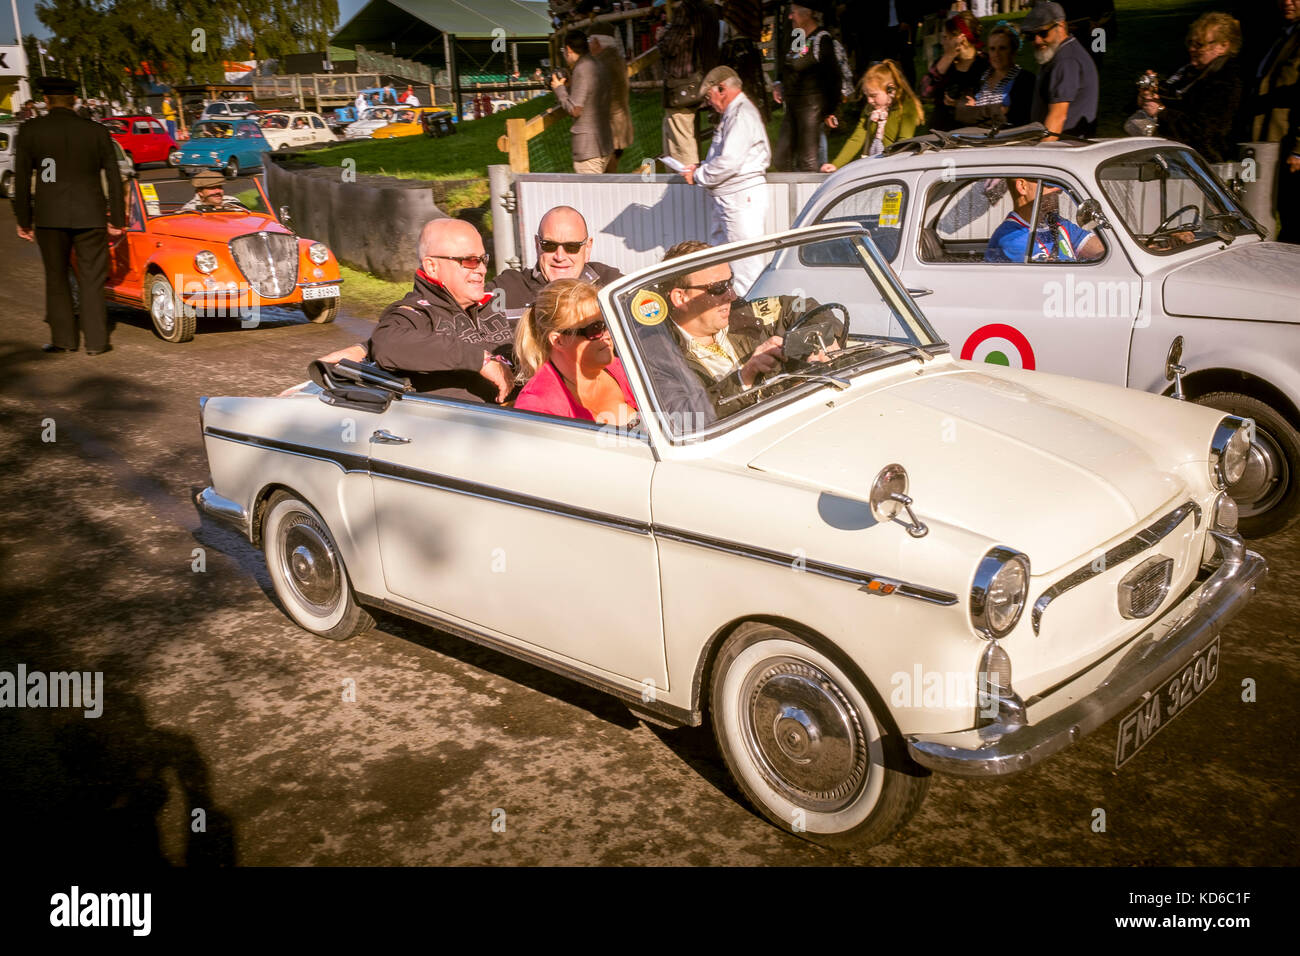 The classic Fiat 500 is celebrated in an Italian cavalcade at the 2017 Goodwood Revival, Sussex, UK. Stock Photo